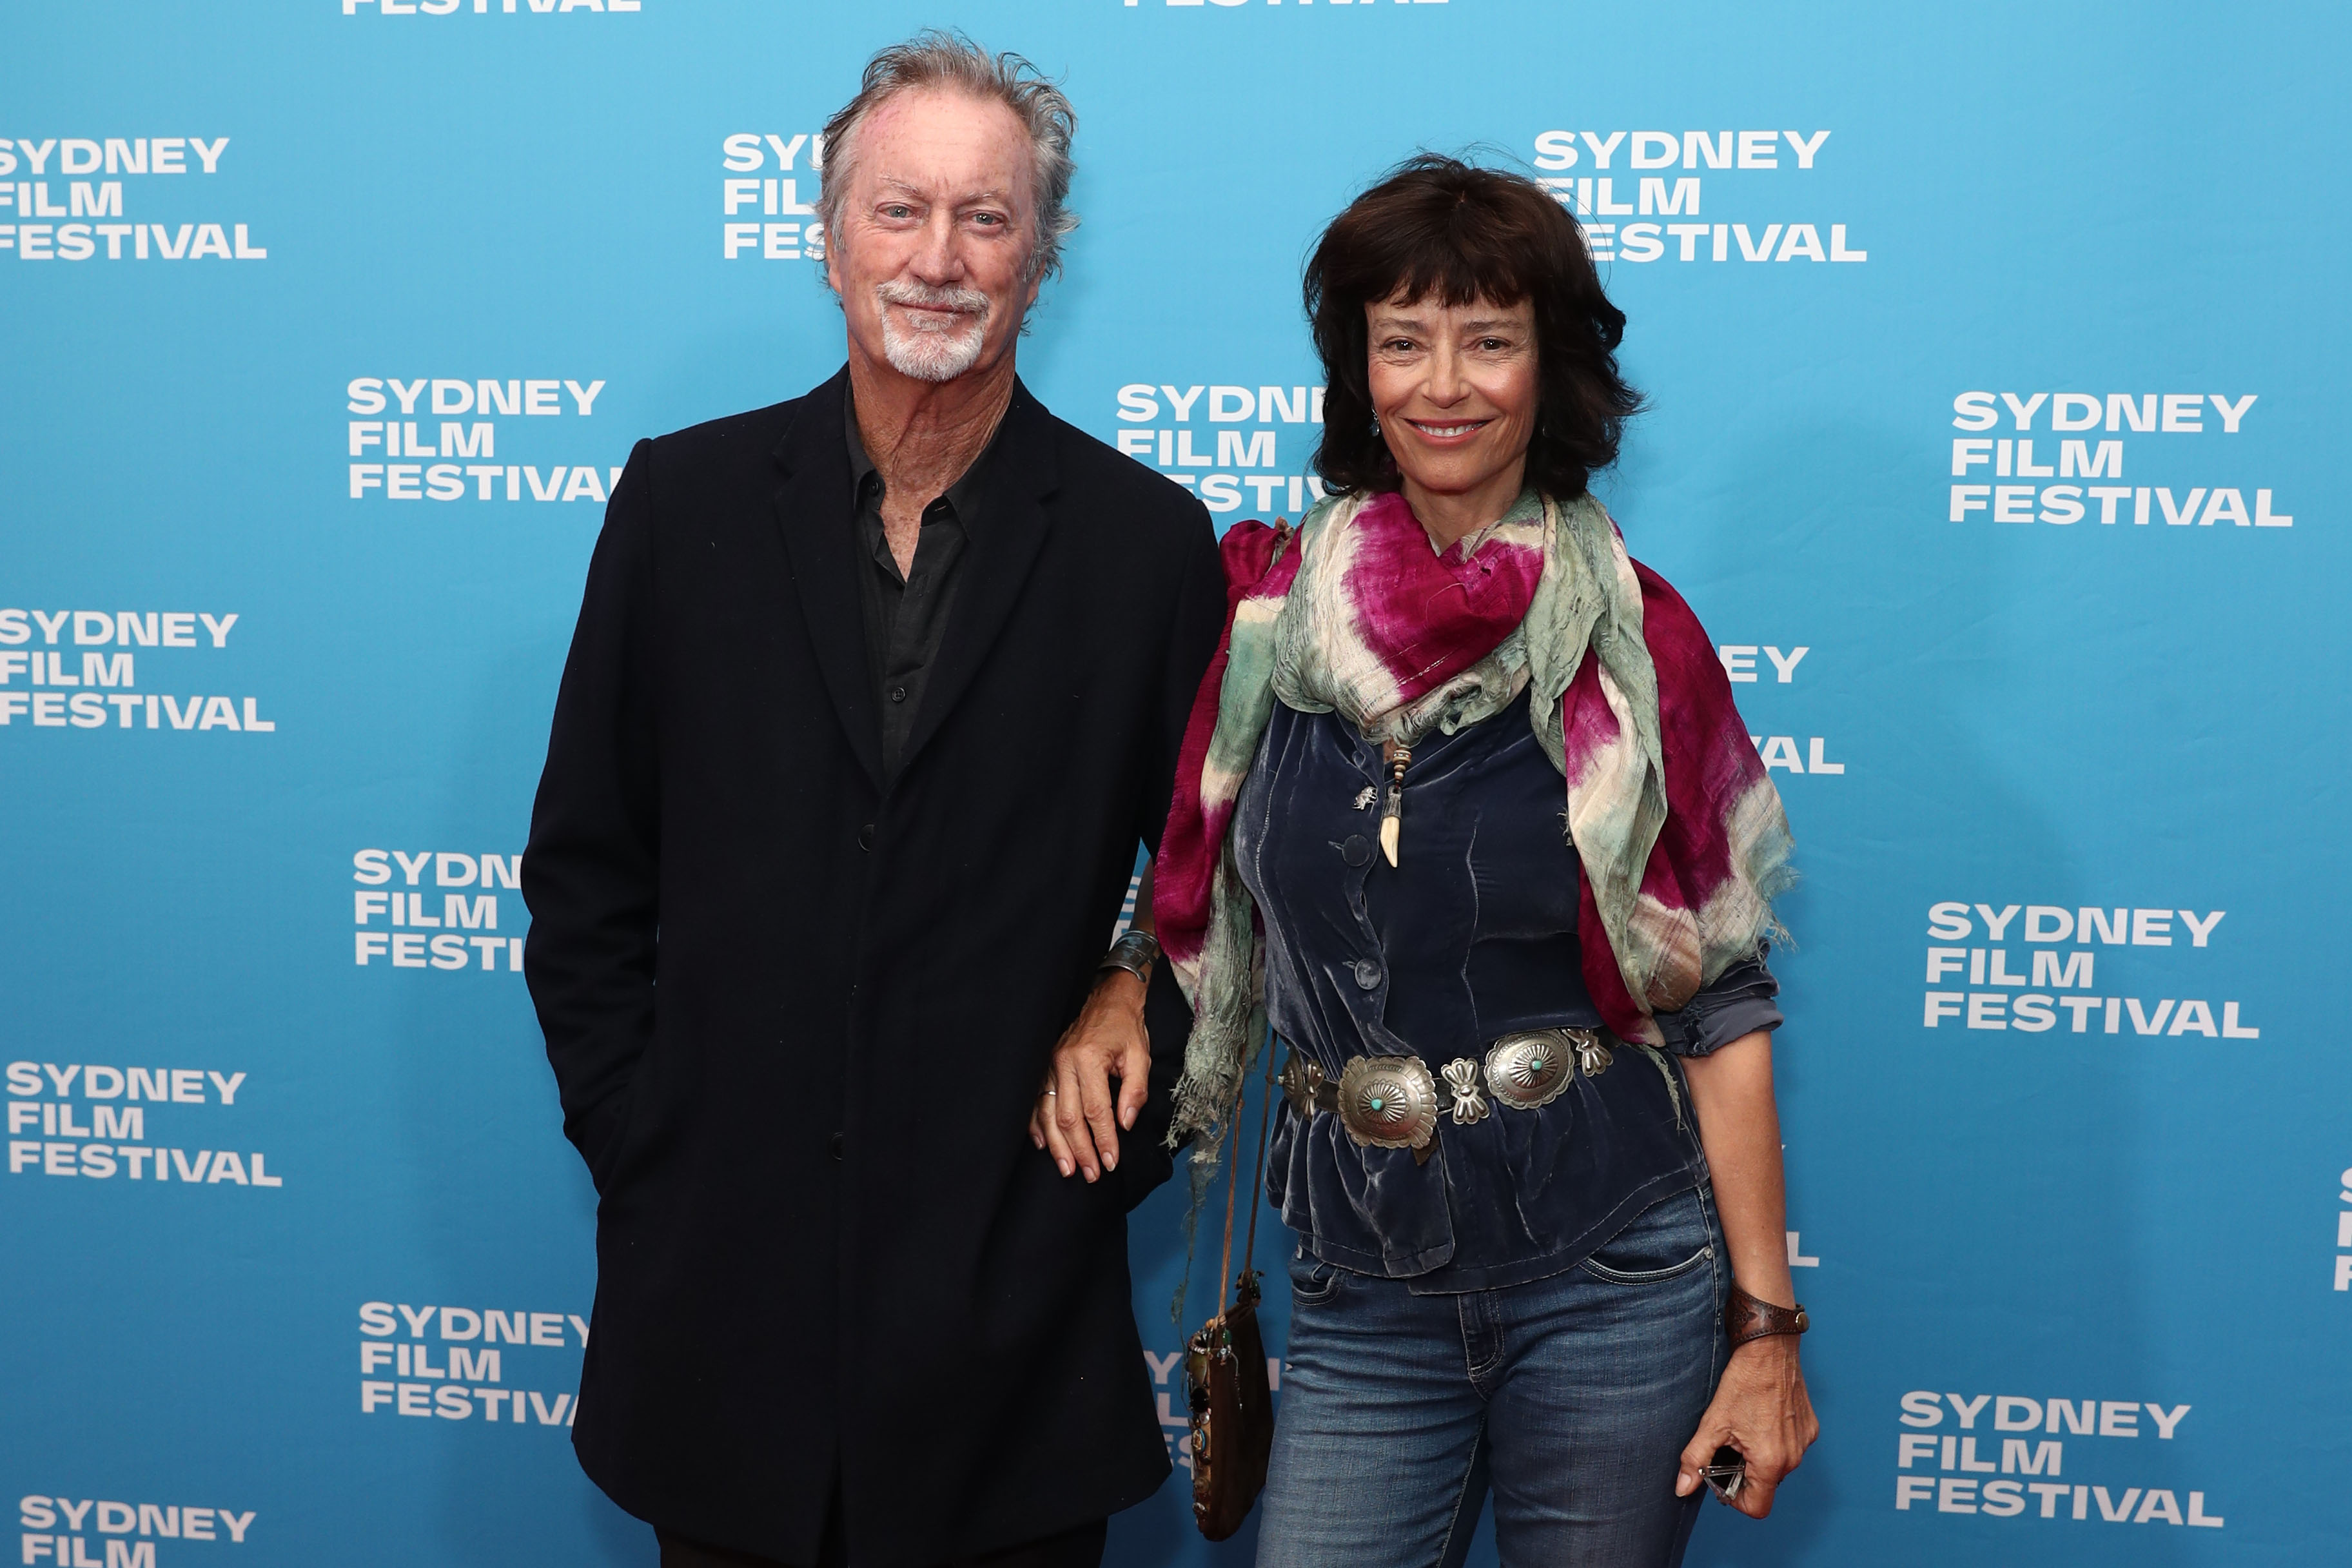 Bryan Brown and Rachel Ward at the 2019 Sydney Film Festival Program Launch | Source: Getty Images